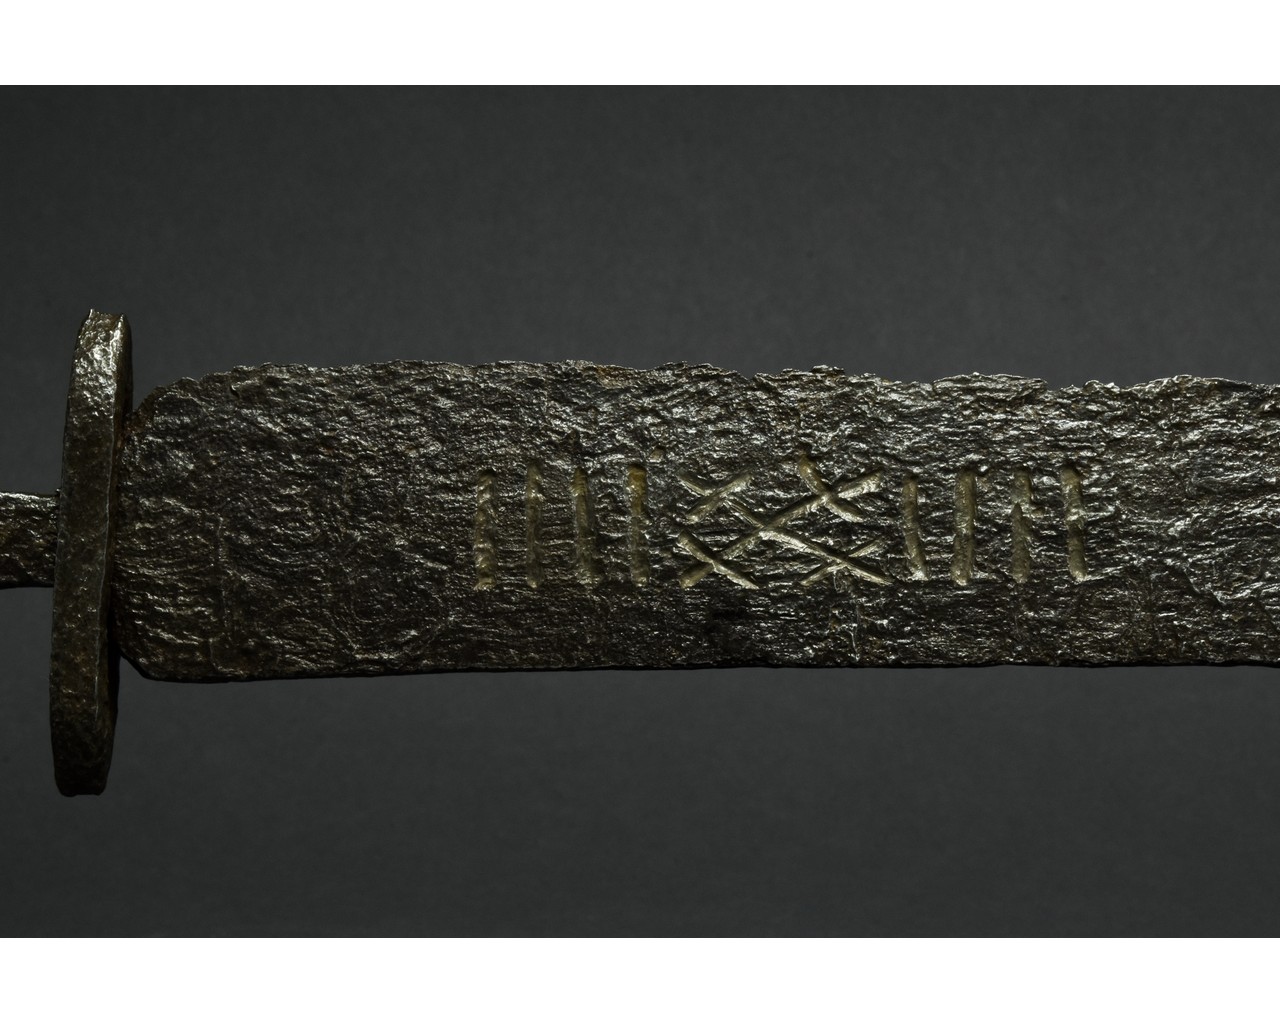 VIKING SINGLE-EDGED SWORD WITH INLAID AND HANDLE - Image 5 of 8